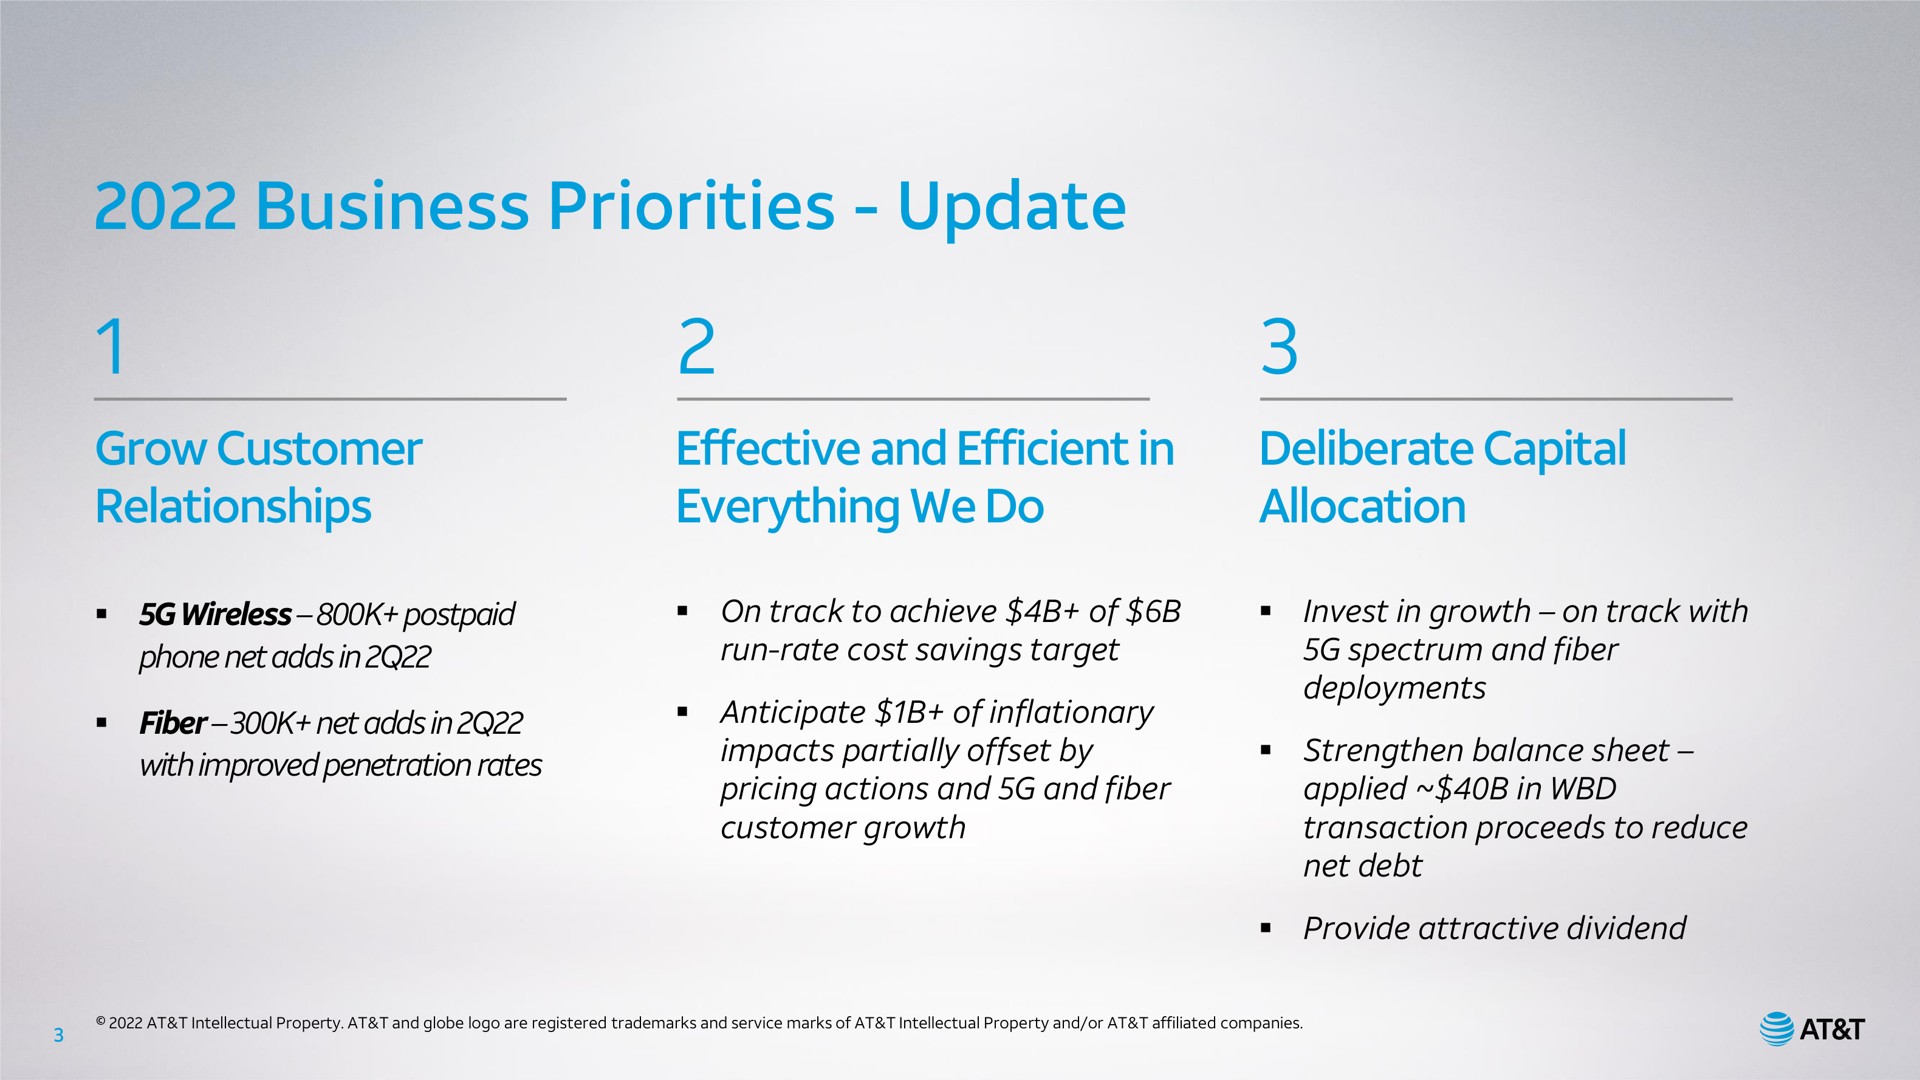 business priorities update grow customer relationships effective and efficient in everything we do deliberate capital allocation wireless postpaid phone net adds in fiber net adds in with improved penetration rates on track to achieve of run rate cost savings target anticipate of inflationary impacts partially offset by pricing actions and and fiber customer growth invest in growth on track with spectrum and fiber deployments strengthen balance sheet applied in transaction proceeds to reduce net debt provide attractive dividend | AT&T